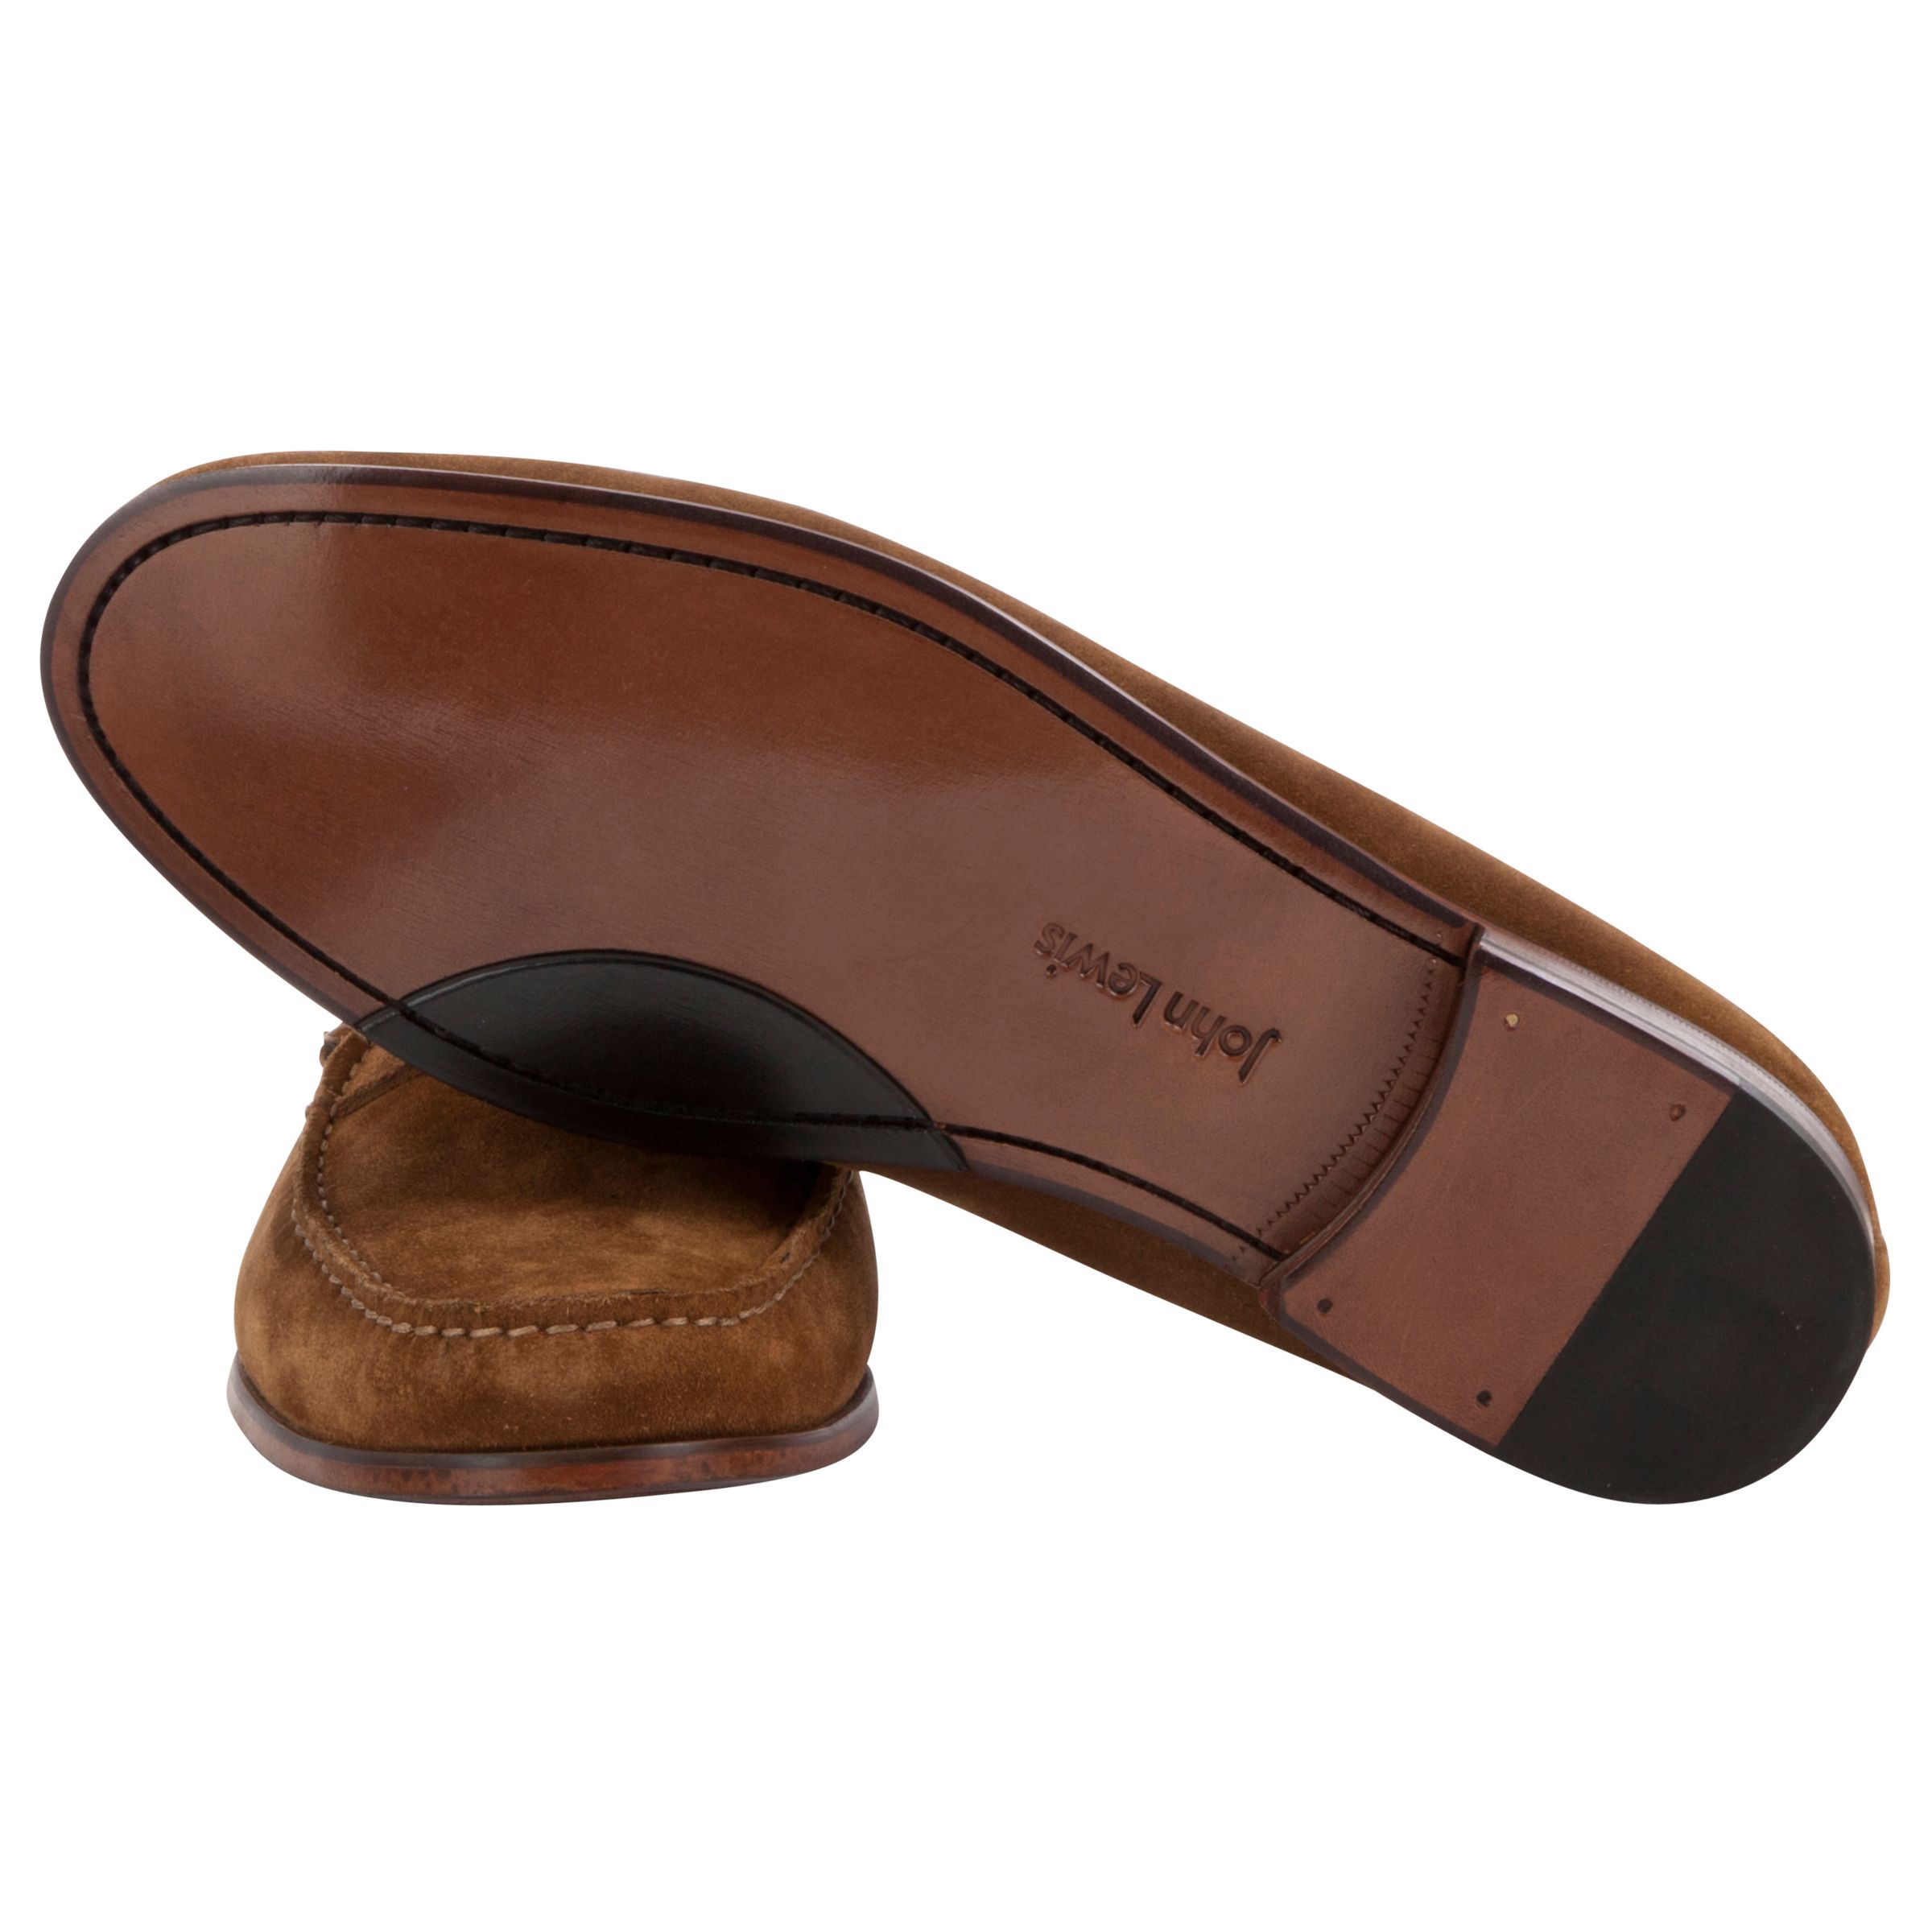 John Lewis & Partners Lloyd Suede Penny Loafers at John Lewis & Partners